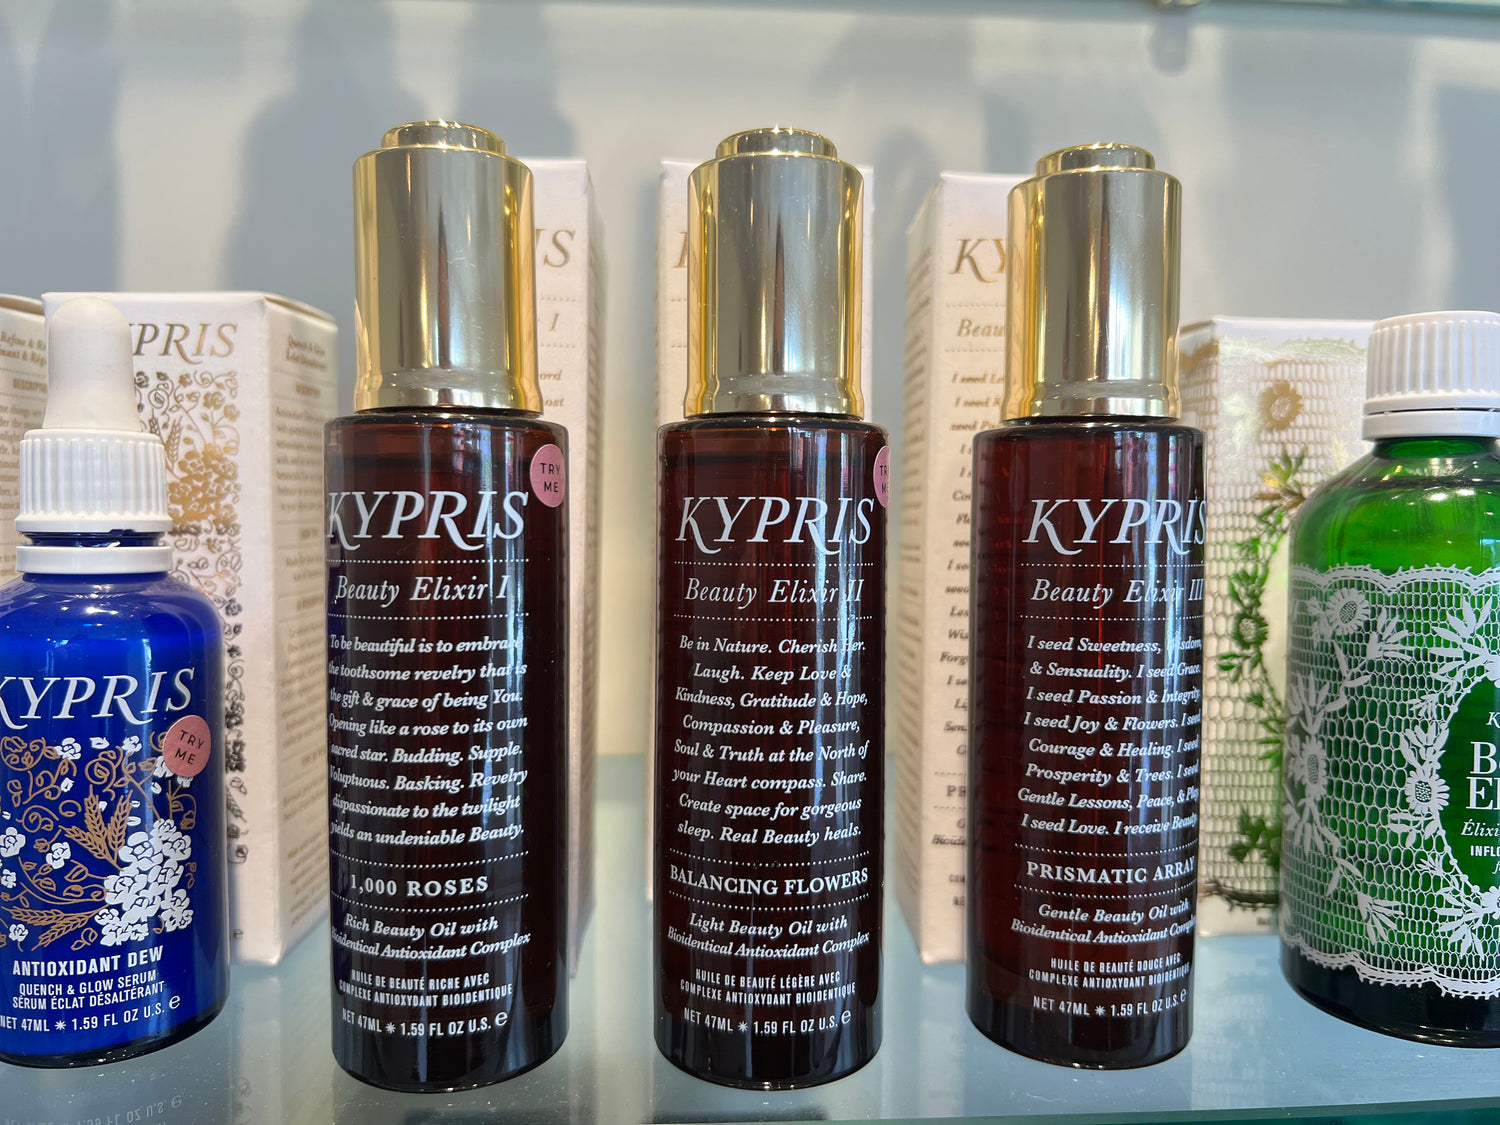 Kypris products